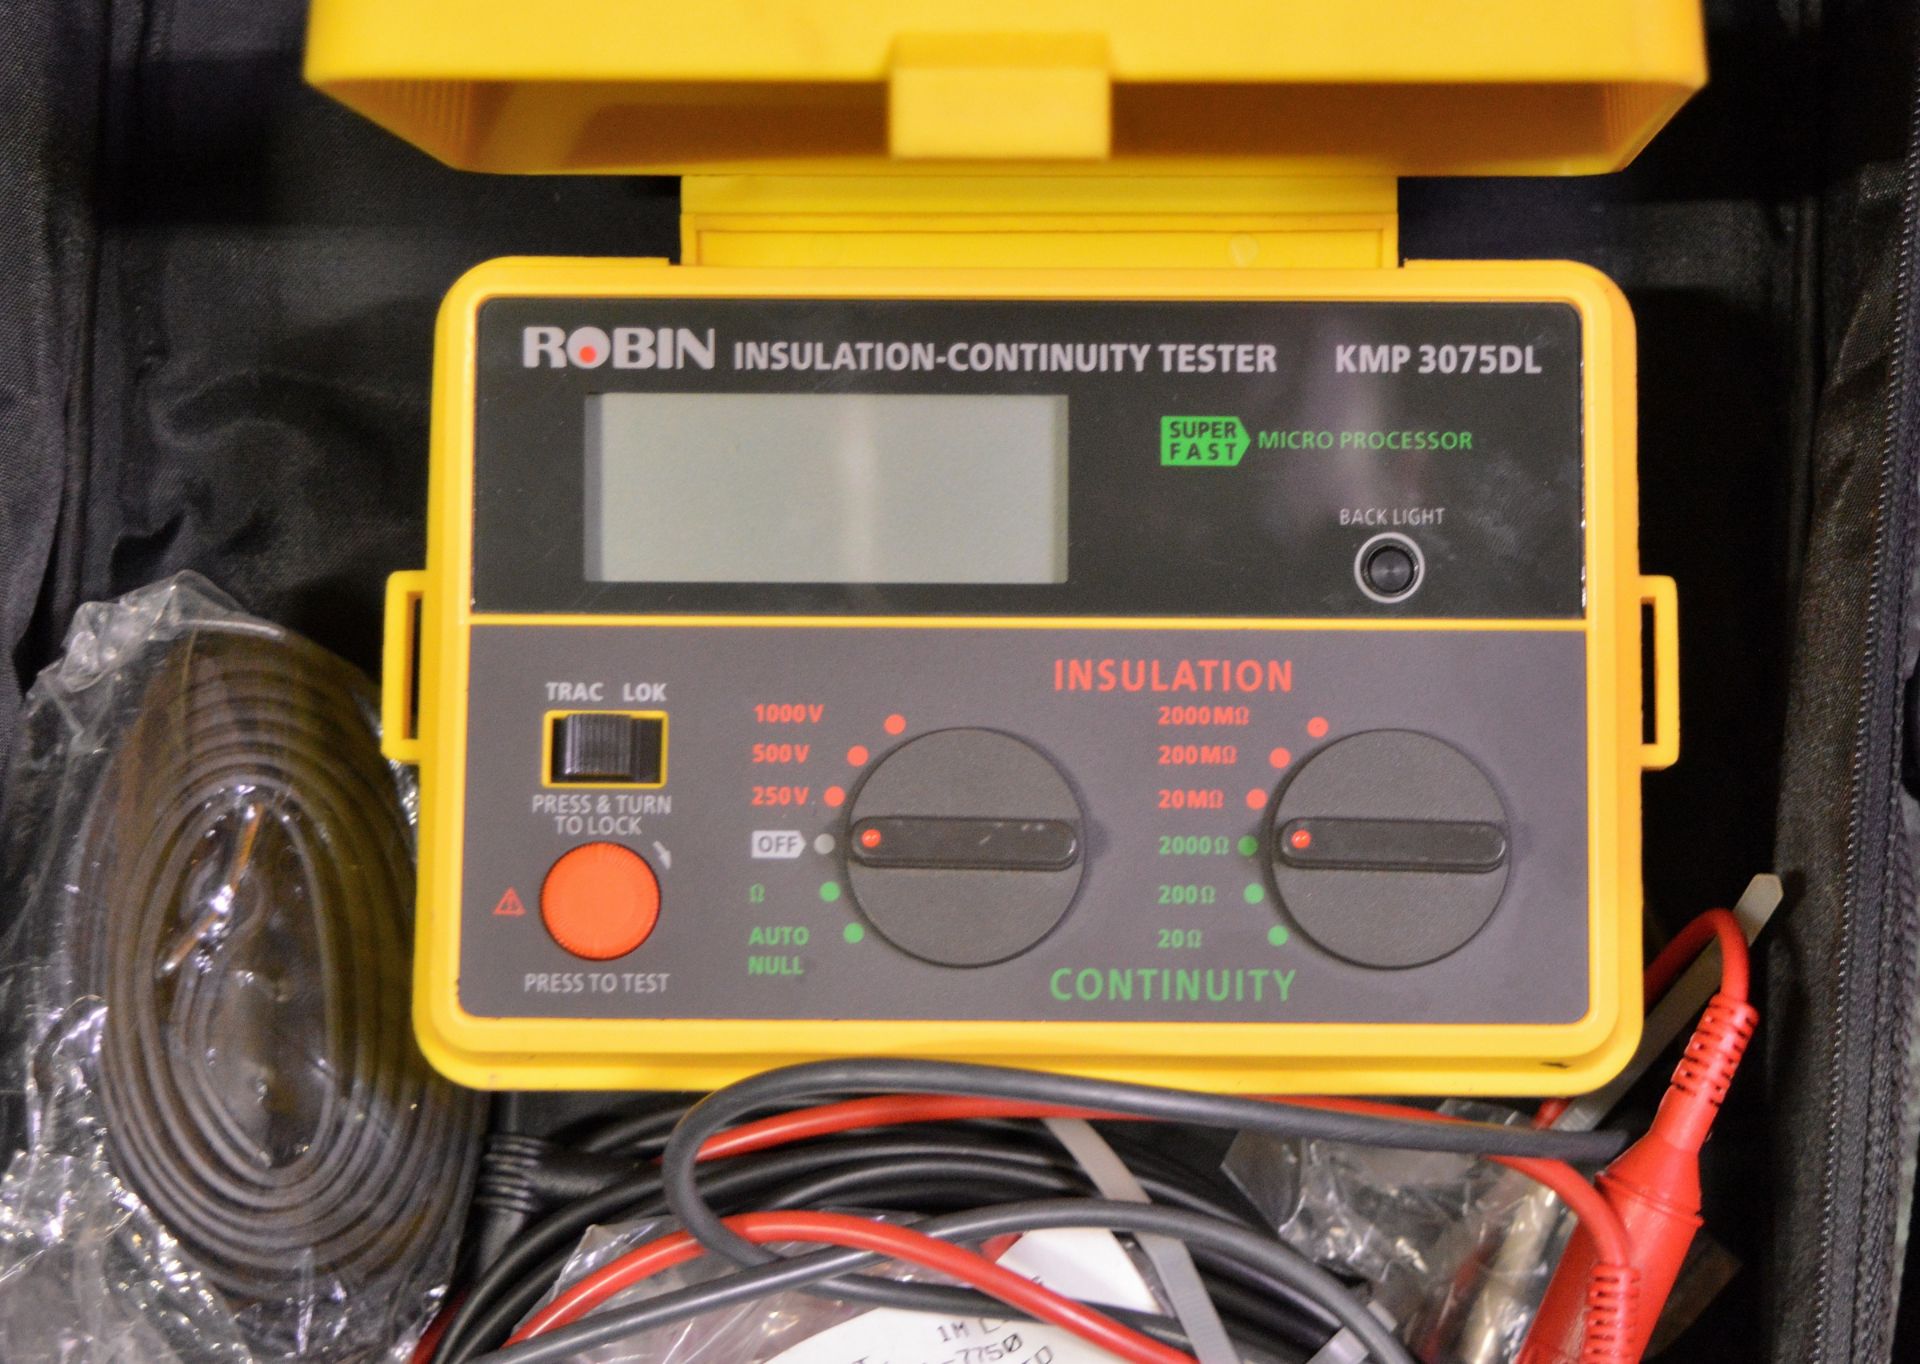 Robin Insulation Continuity Tester Model 3075DL in carry bag - Image 2 of 2